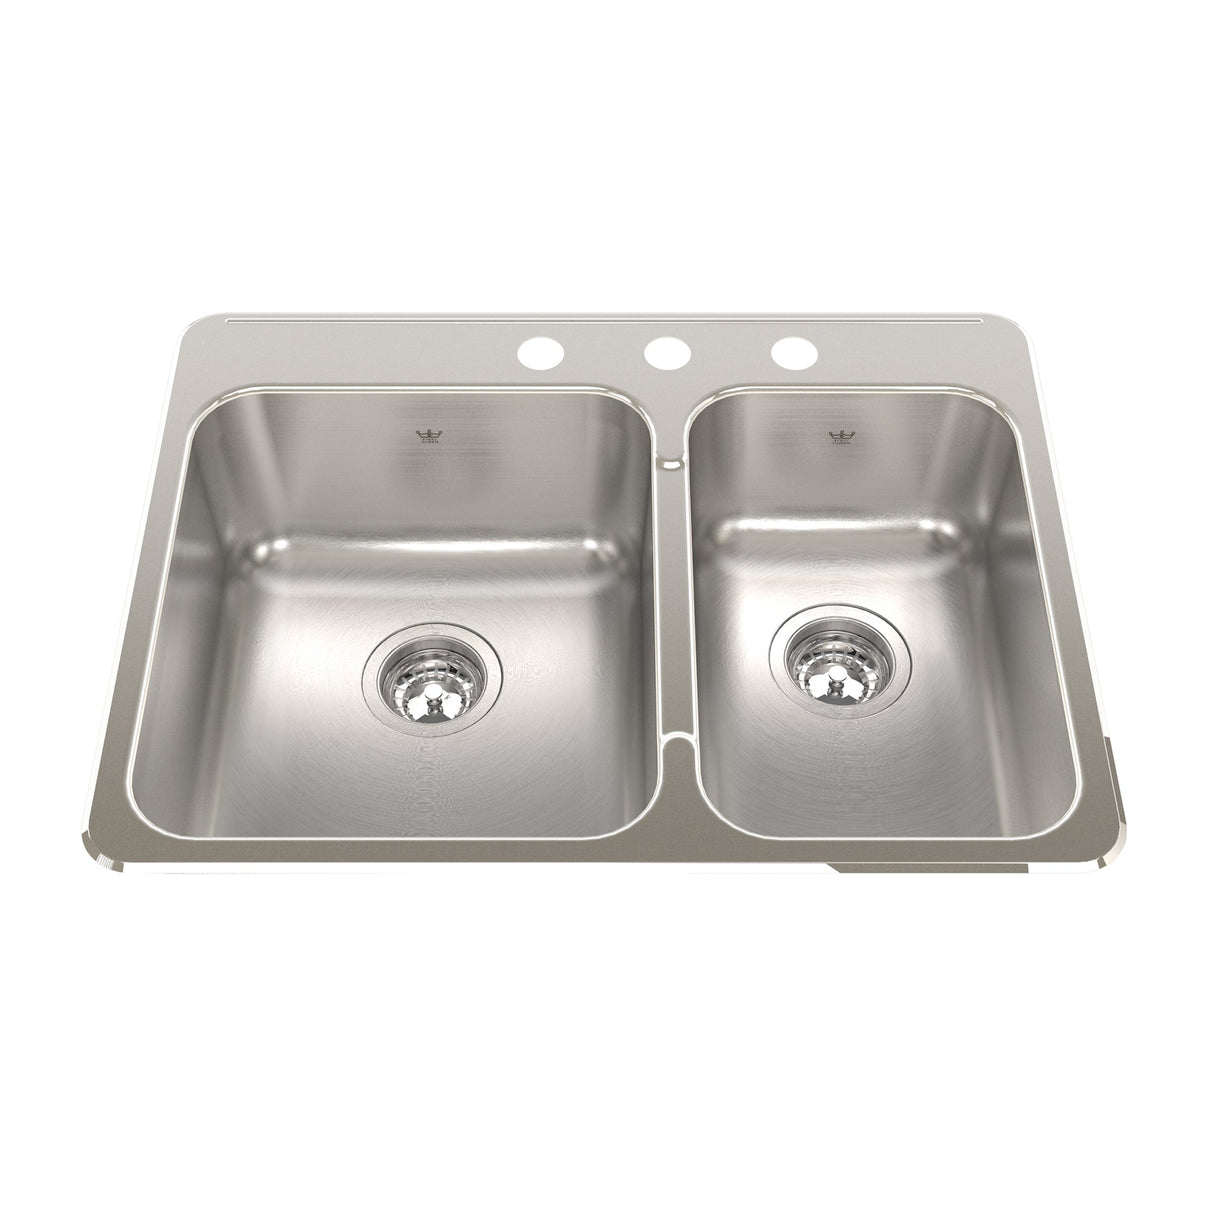 KINDRED QCLA2027R-8-3N Steel Queen 27.25-in LR x 20.56-in FB x 8-in DP Drop In Double Bowl 3-Hole Stainless Steel Kitchen Sink In Satin Finished Bowls with Mirror Finished Rim